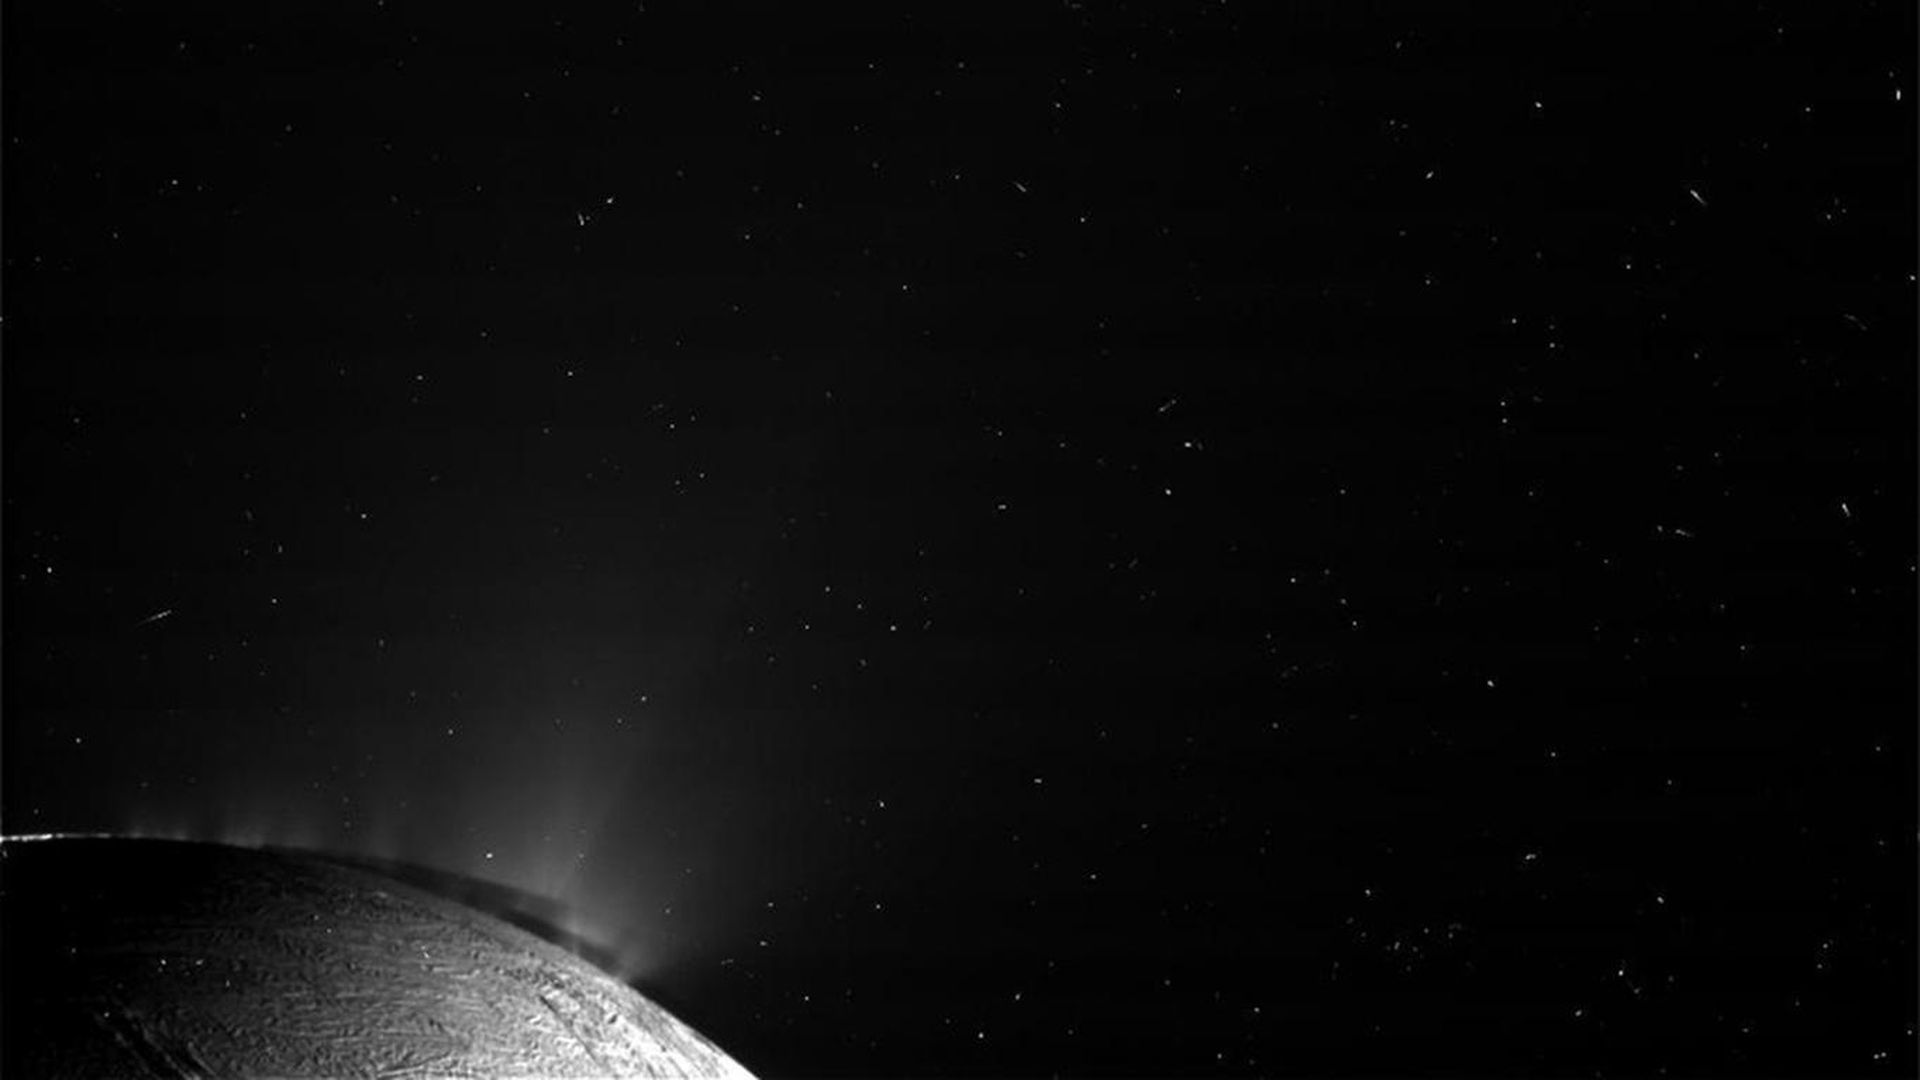 Geysers erupt from the pole of Saturn's moon Enceladus.